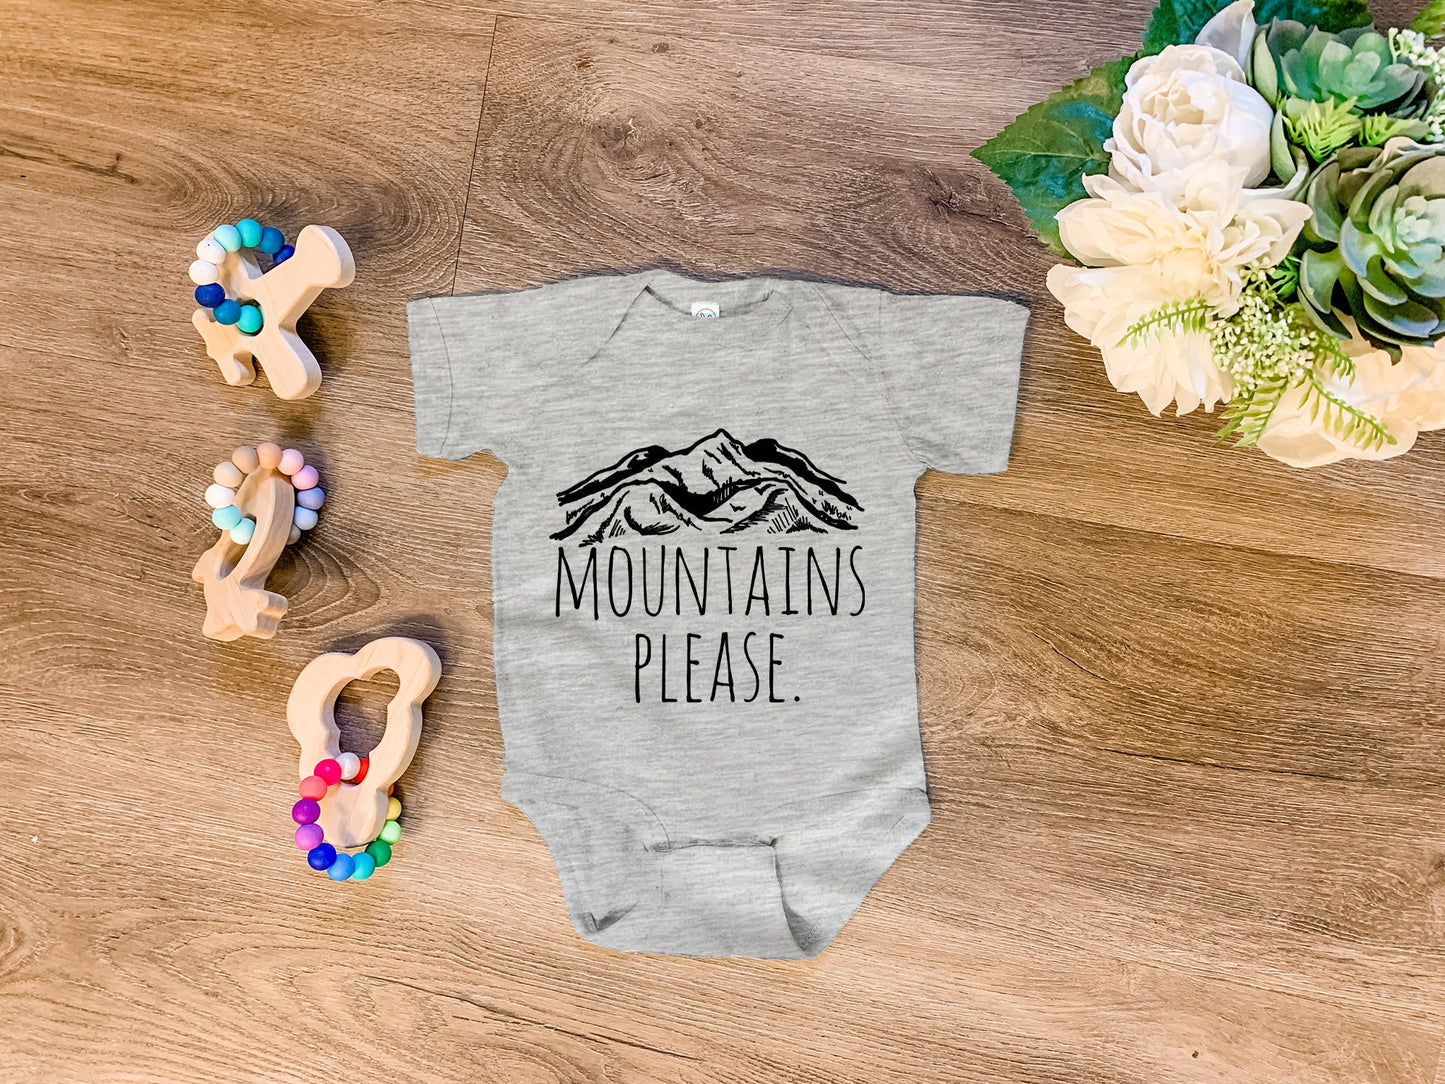 Mountains Please - Onesie - Heather Gray, Chill, or Lavender